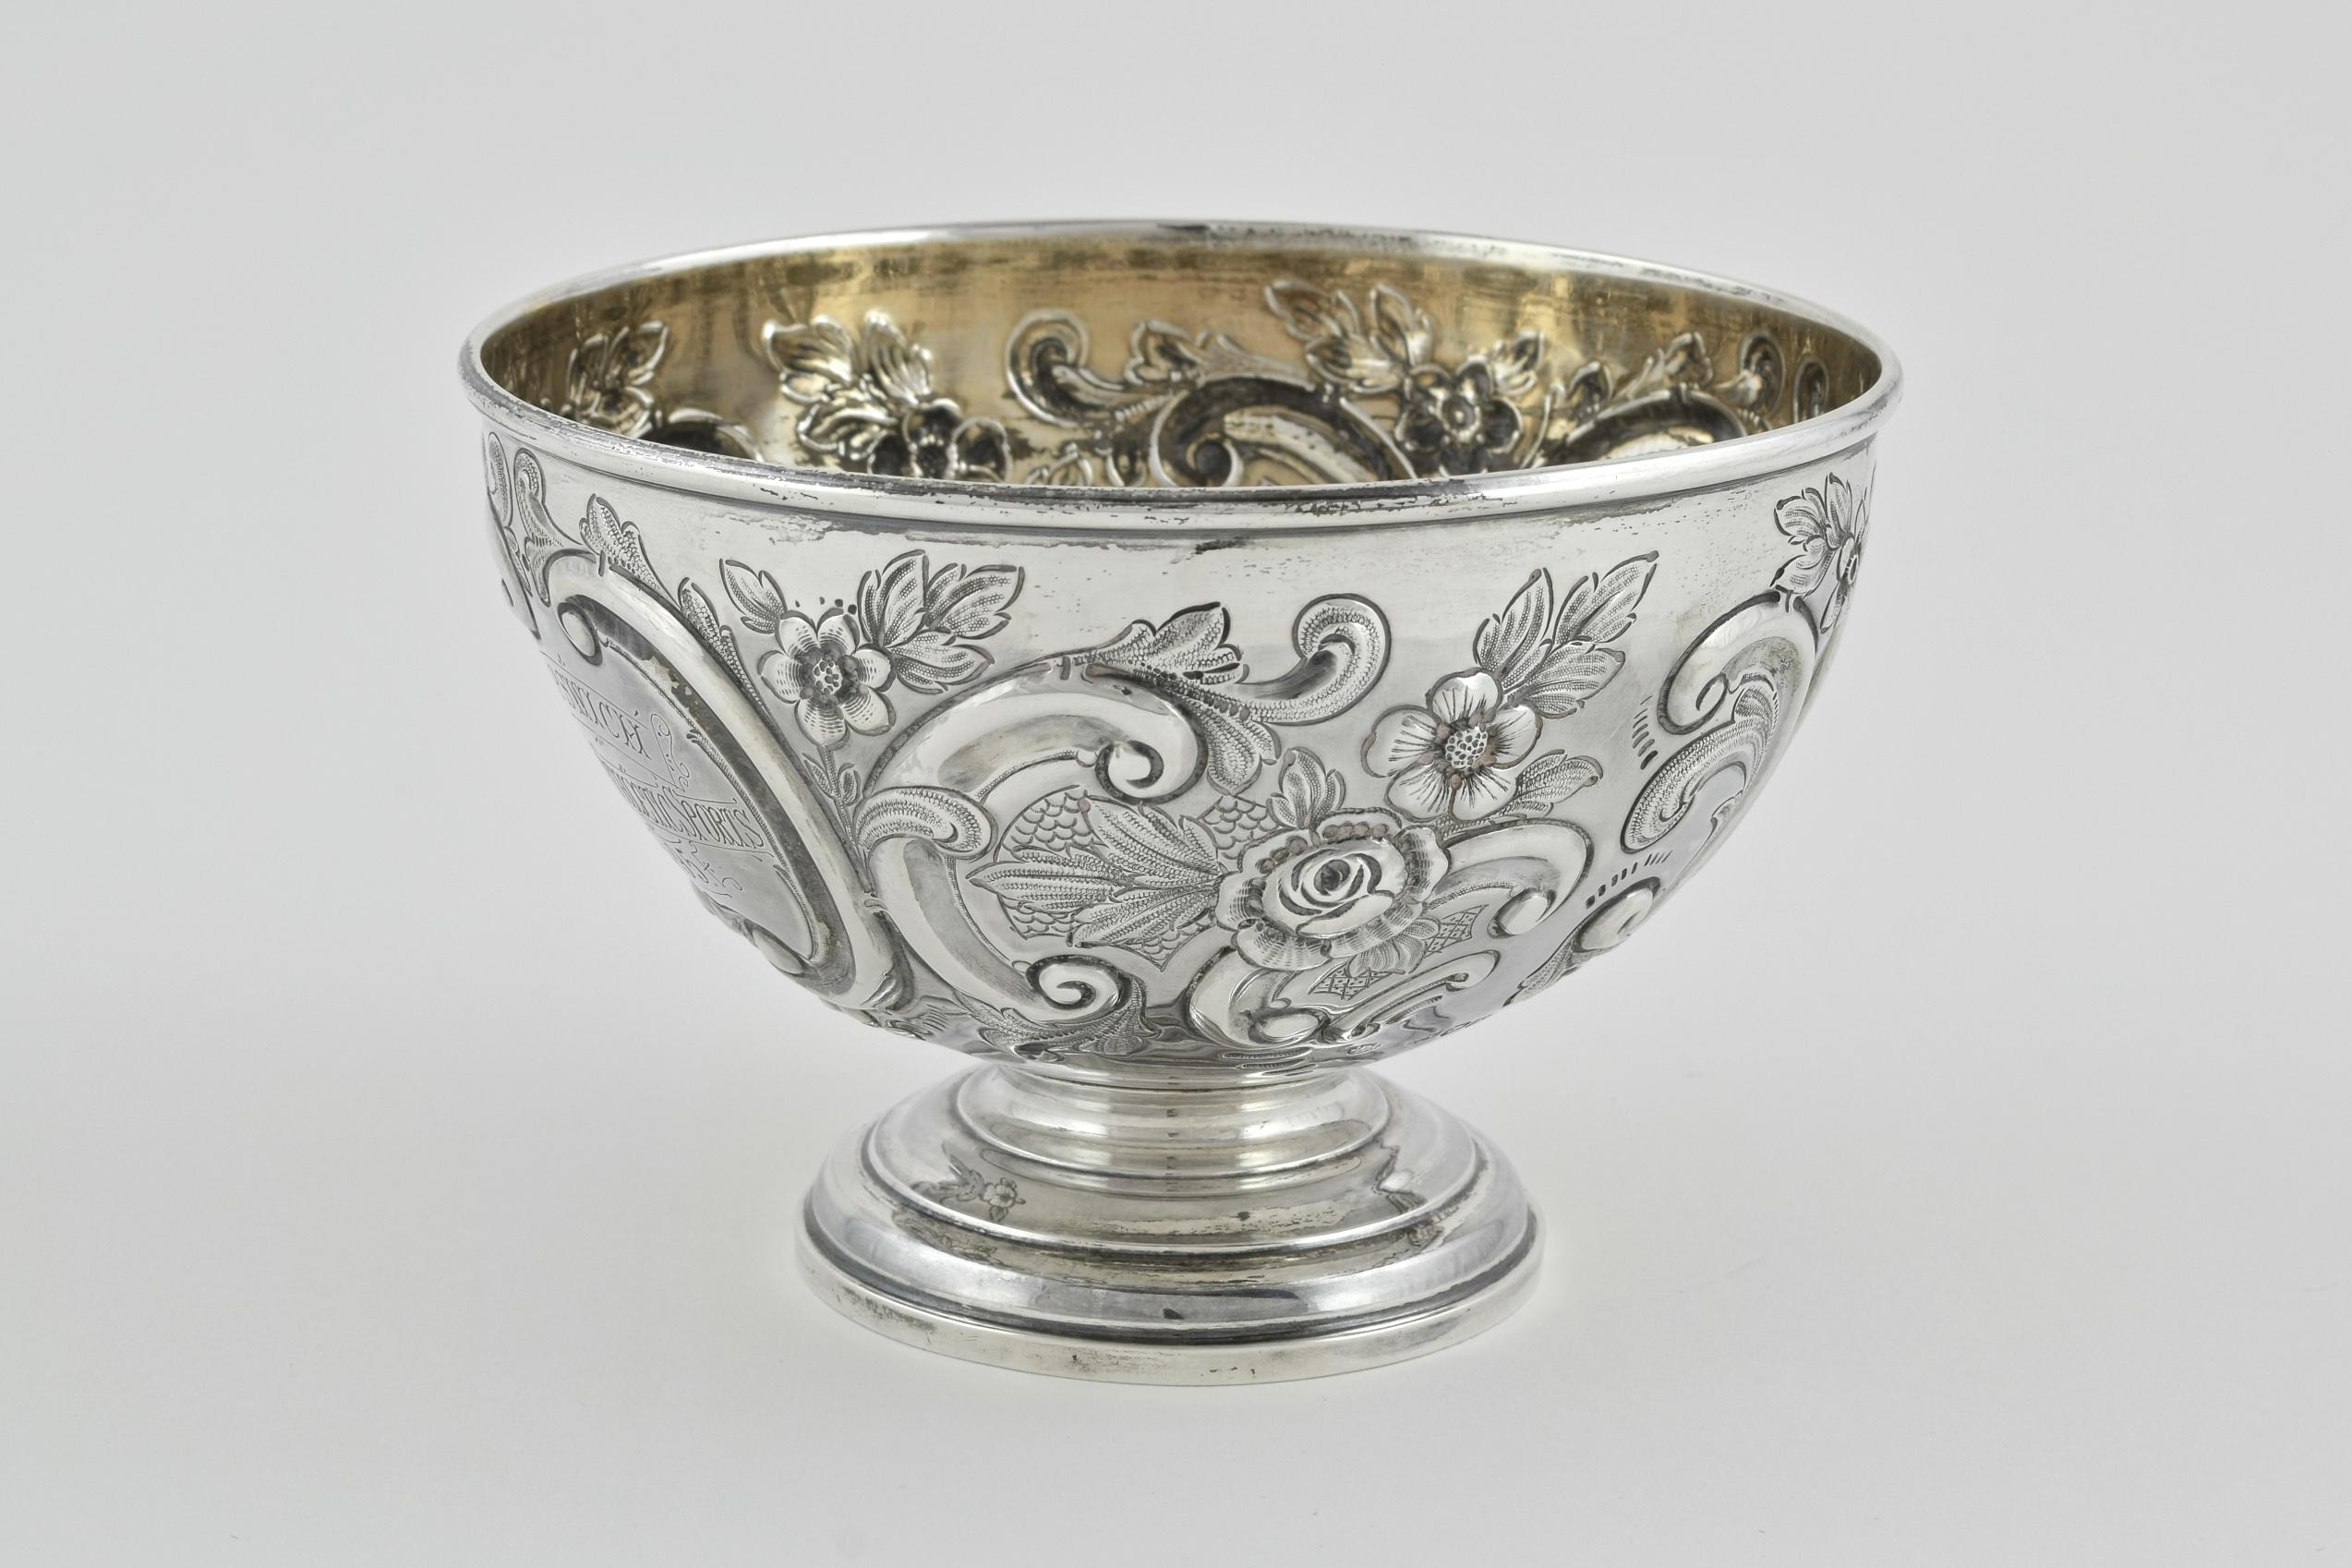 Styled with repousse and chased work, the body of the bowl is Intricately engraved with flowers, foliage and scrolls. The engraving on the body of the bowl reads 'IP Switch Amateur Athletic Sports 1895', and the other 'Two Miles Flat Race won By G.W